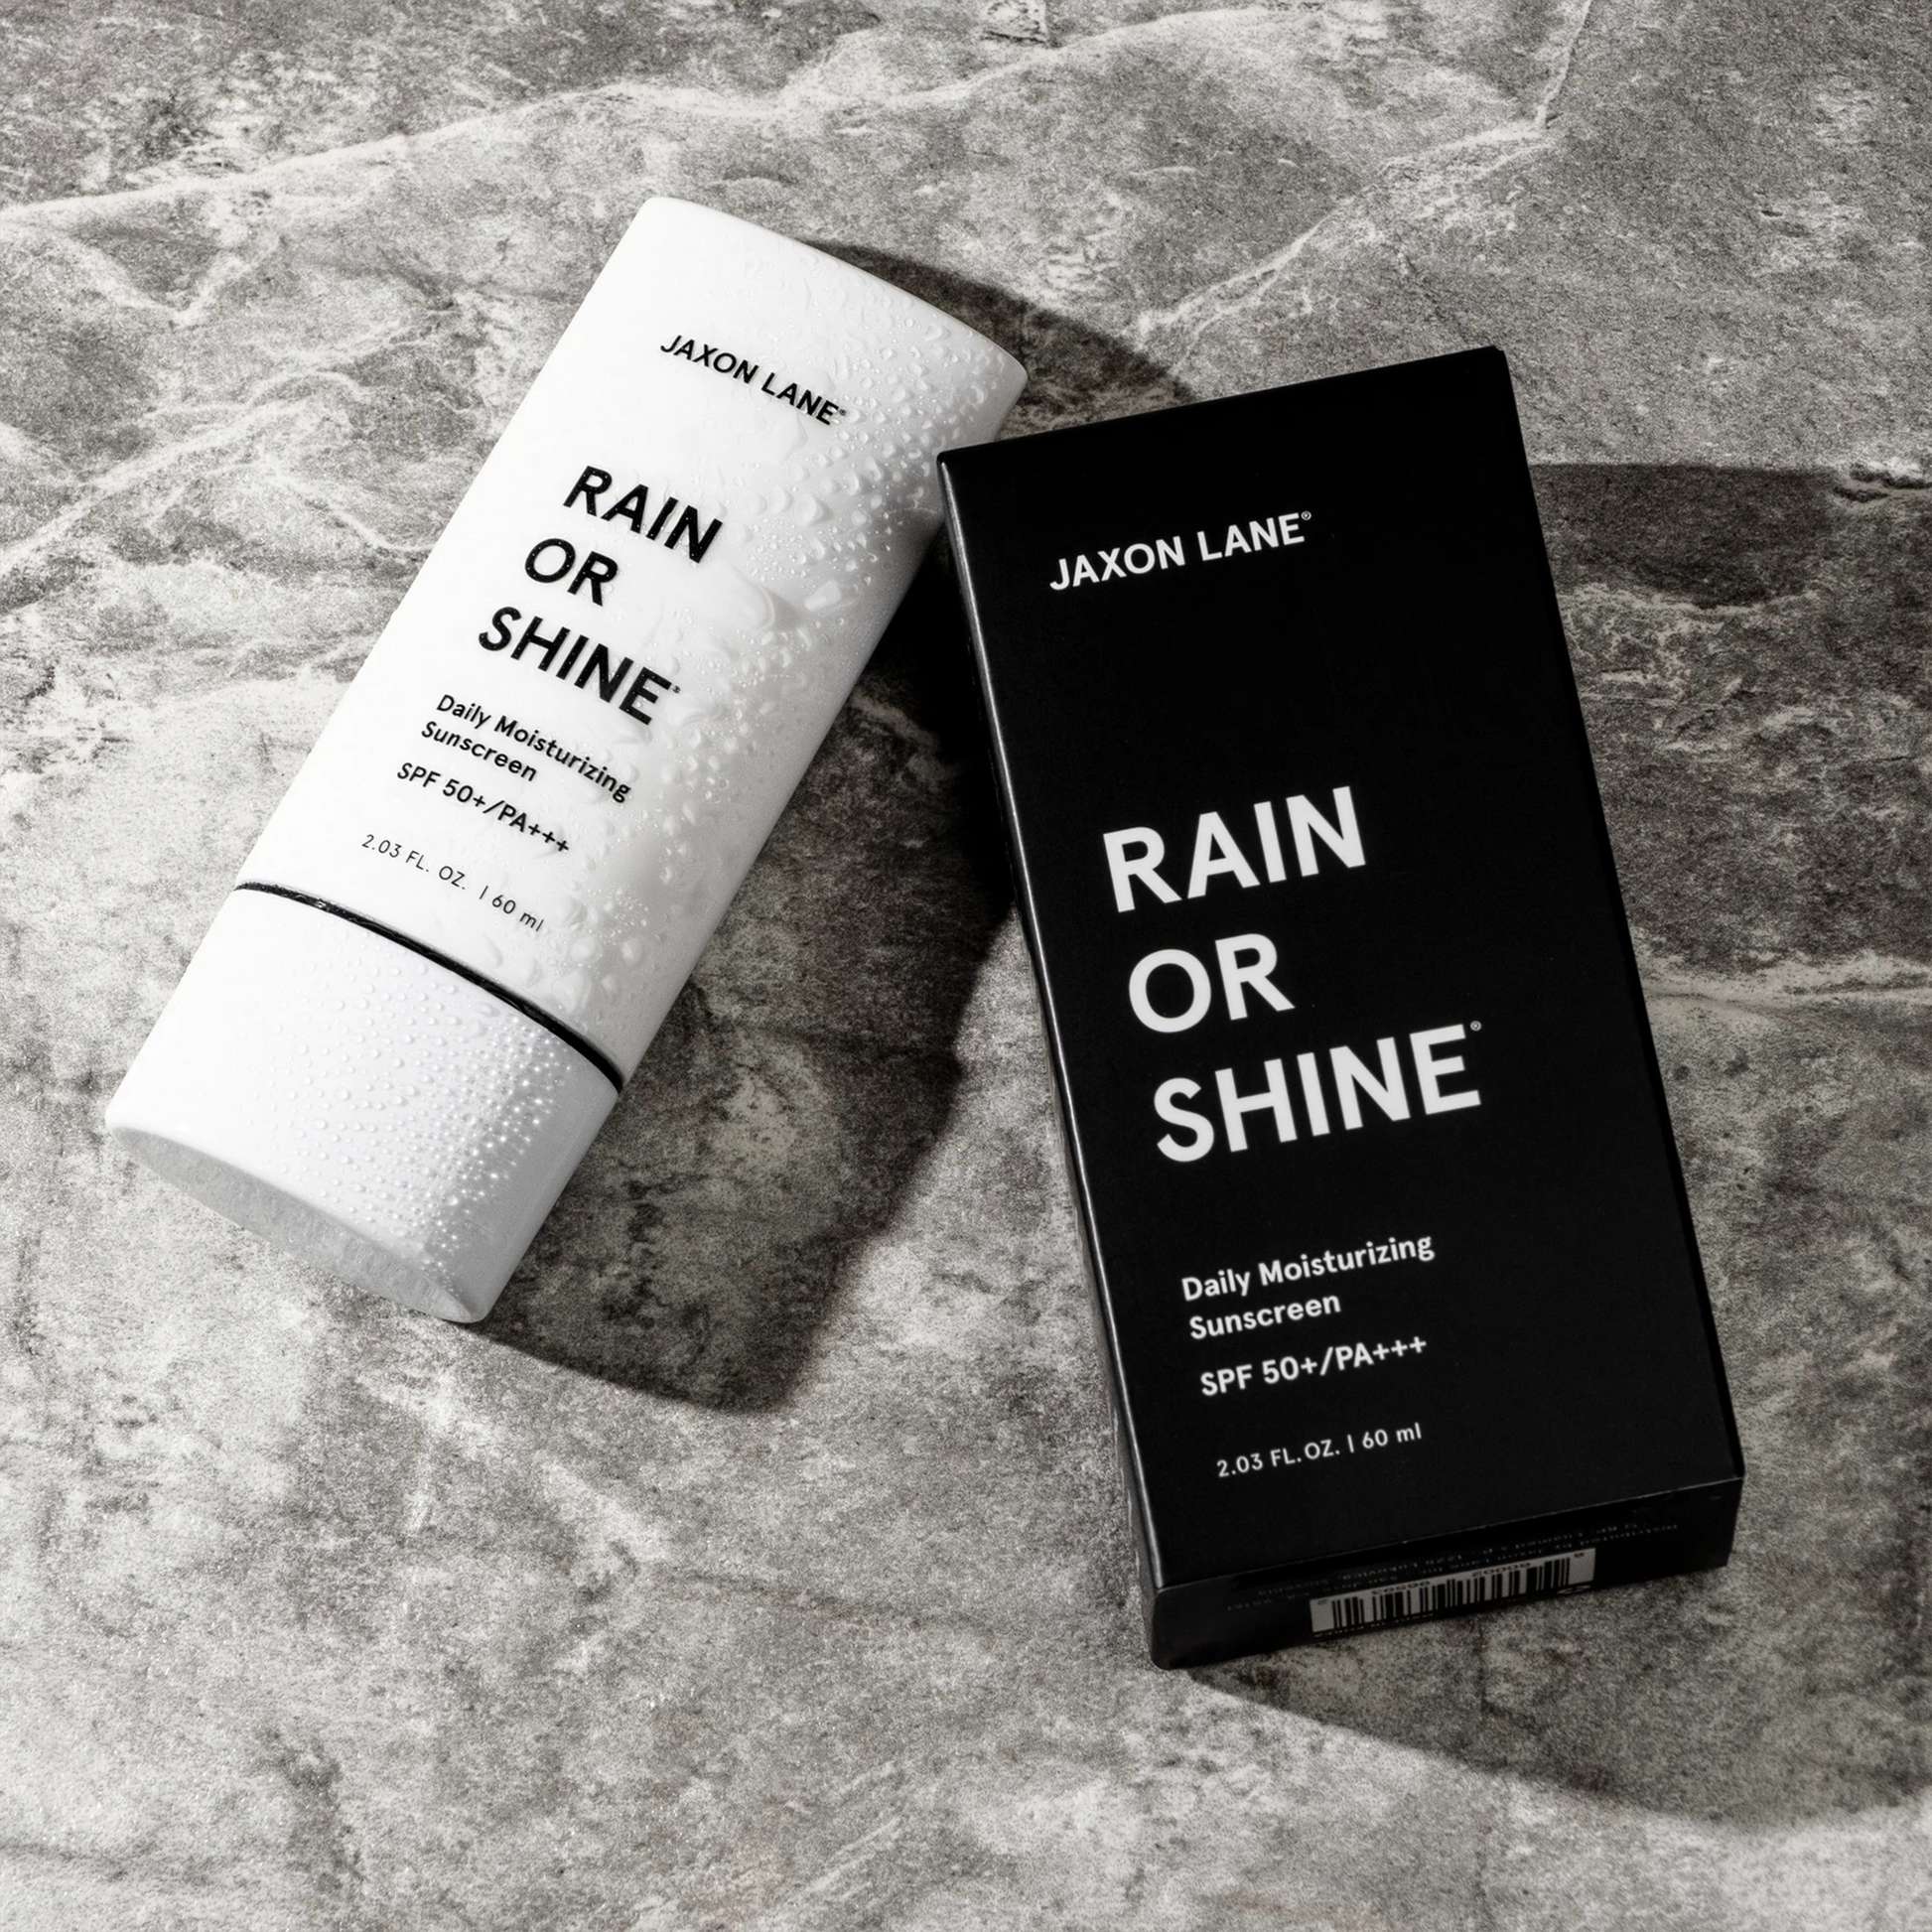 Jaxon Lane Rain Or Shine Daily Moisturizing Sunscreen: No white cast, oil-free, hassle free sunscreen.  2x award winning sunscreen that goes on smooth and dries clear, so you can feel safe and look great.